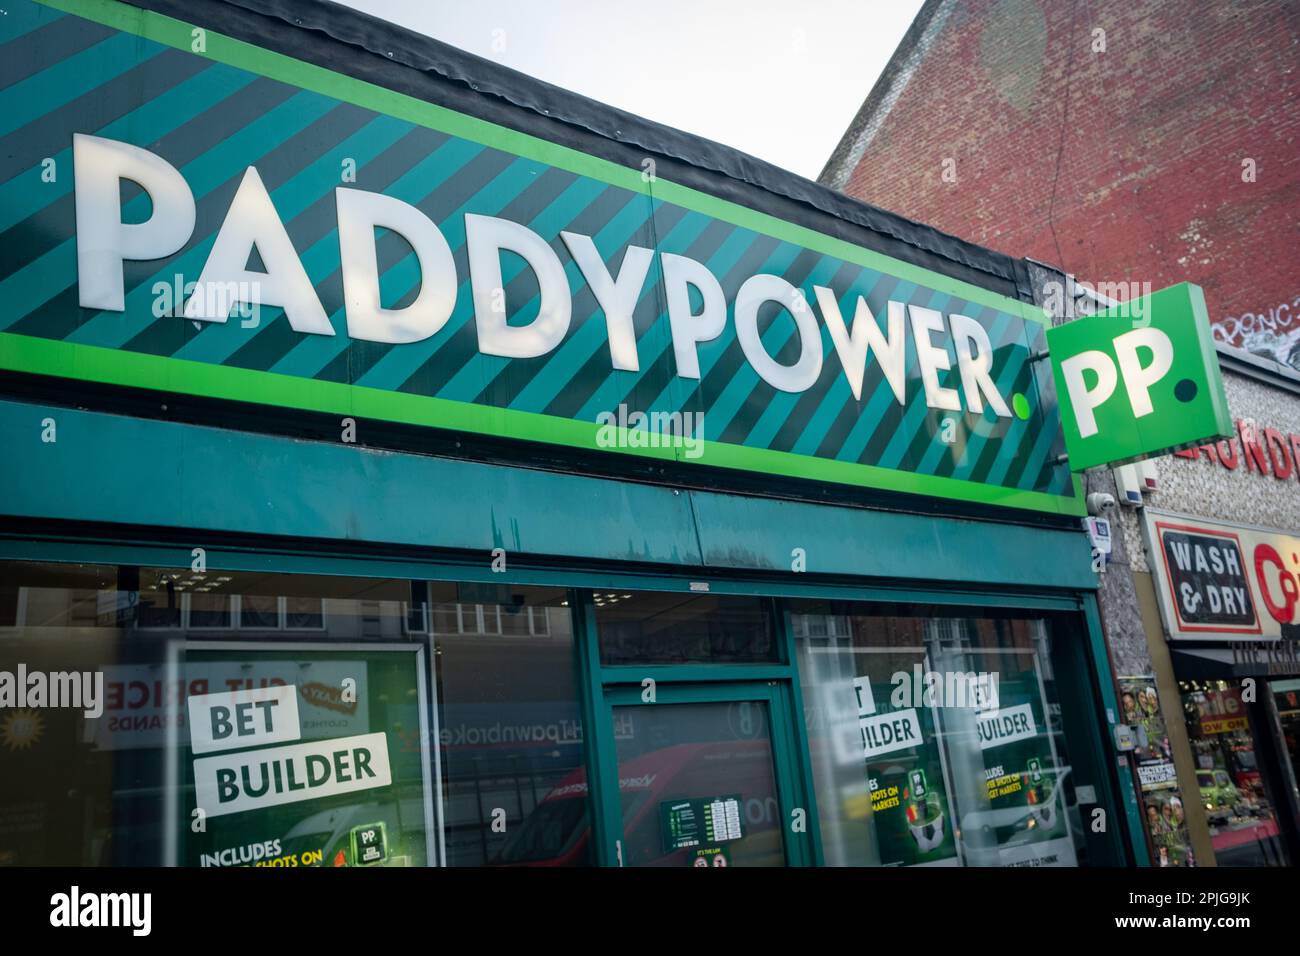 London- Paddy Power exterior signage,  an Irish bookmaker with many high street betting shops across the UK. Stock Photo